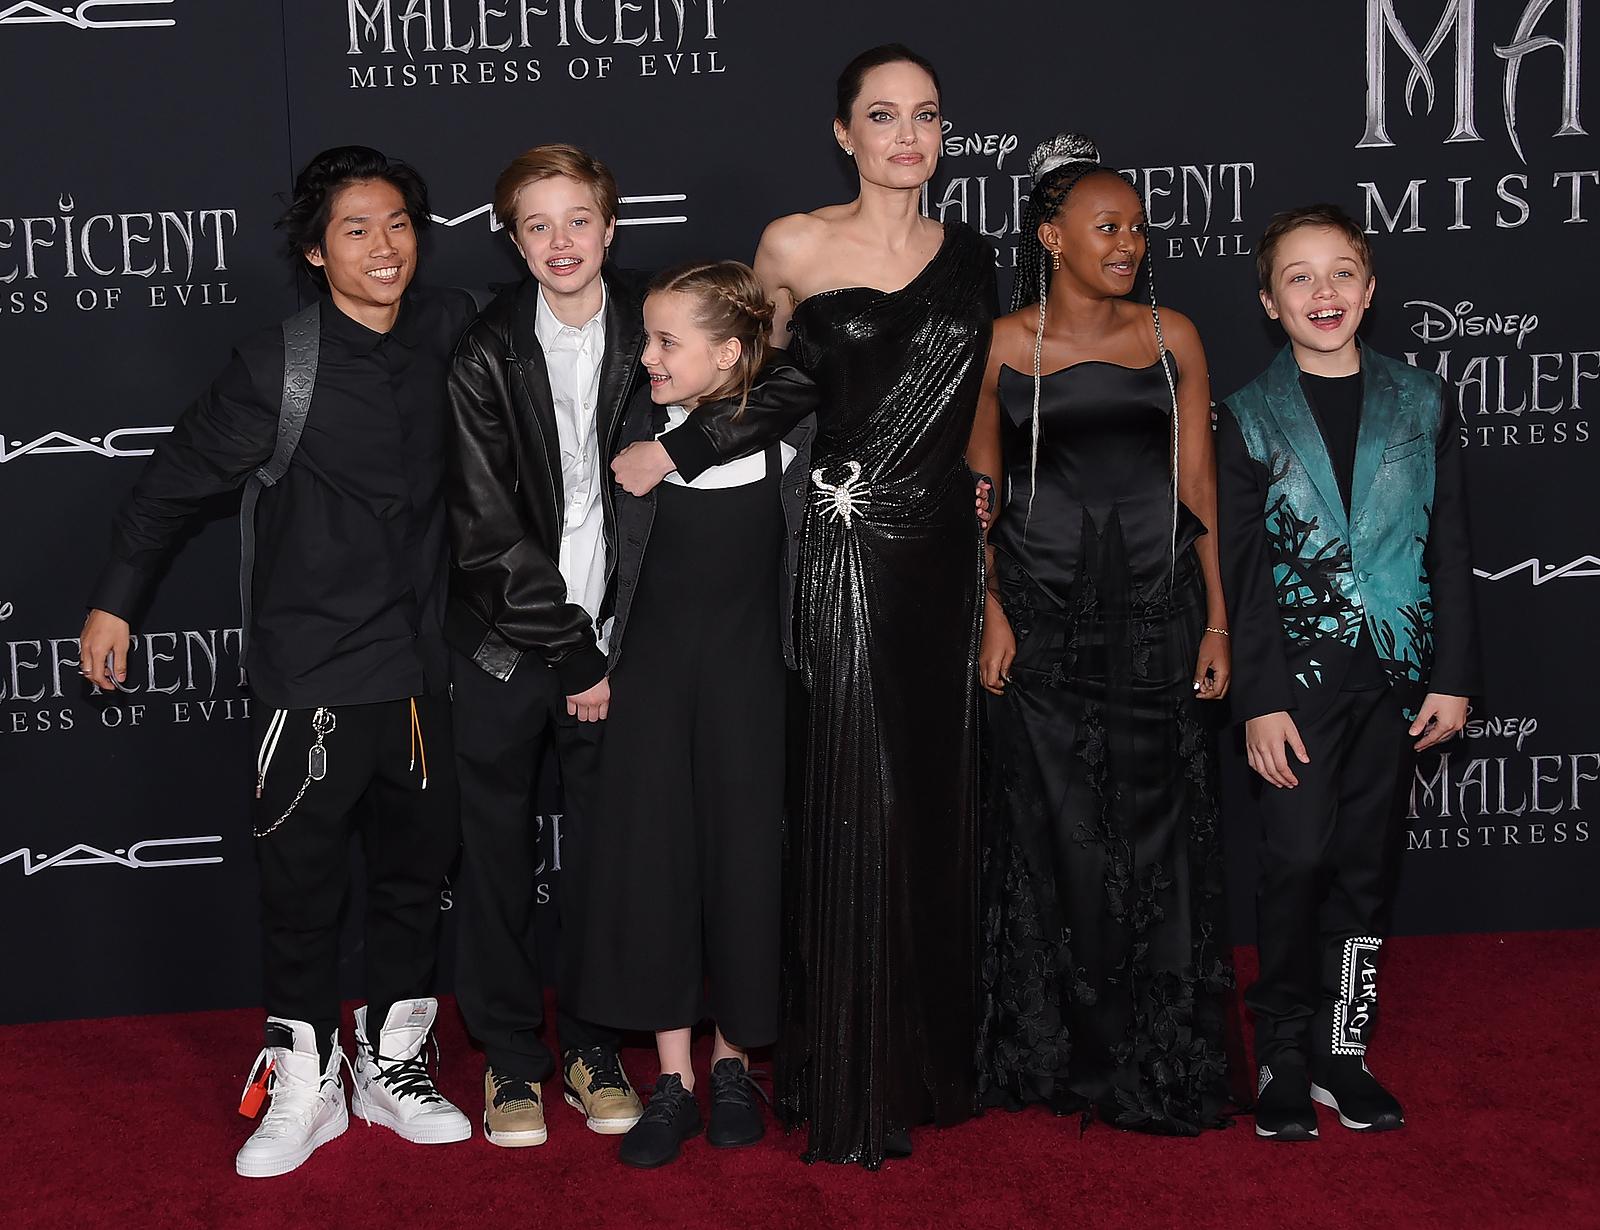 Image of Angelina Jolie at at the Malificent  world Premier with her children starting with Pax, Shiloh, angelina, Vivienn.